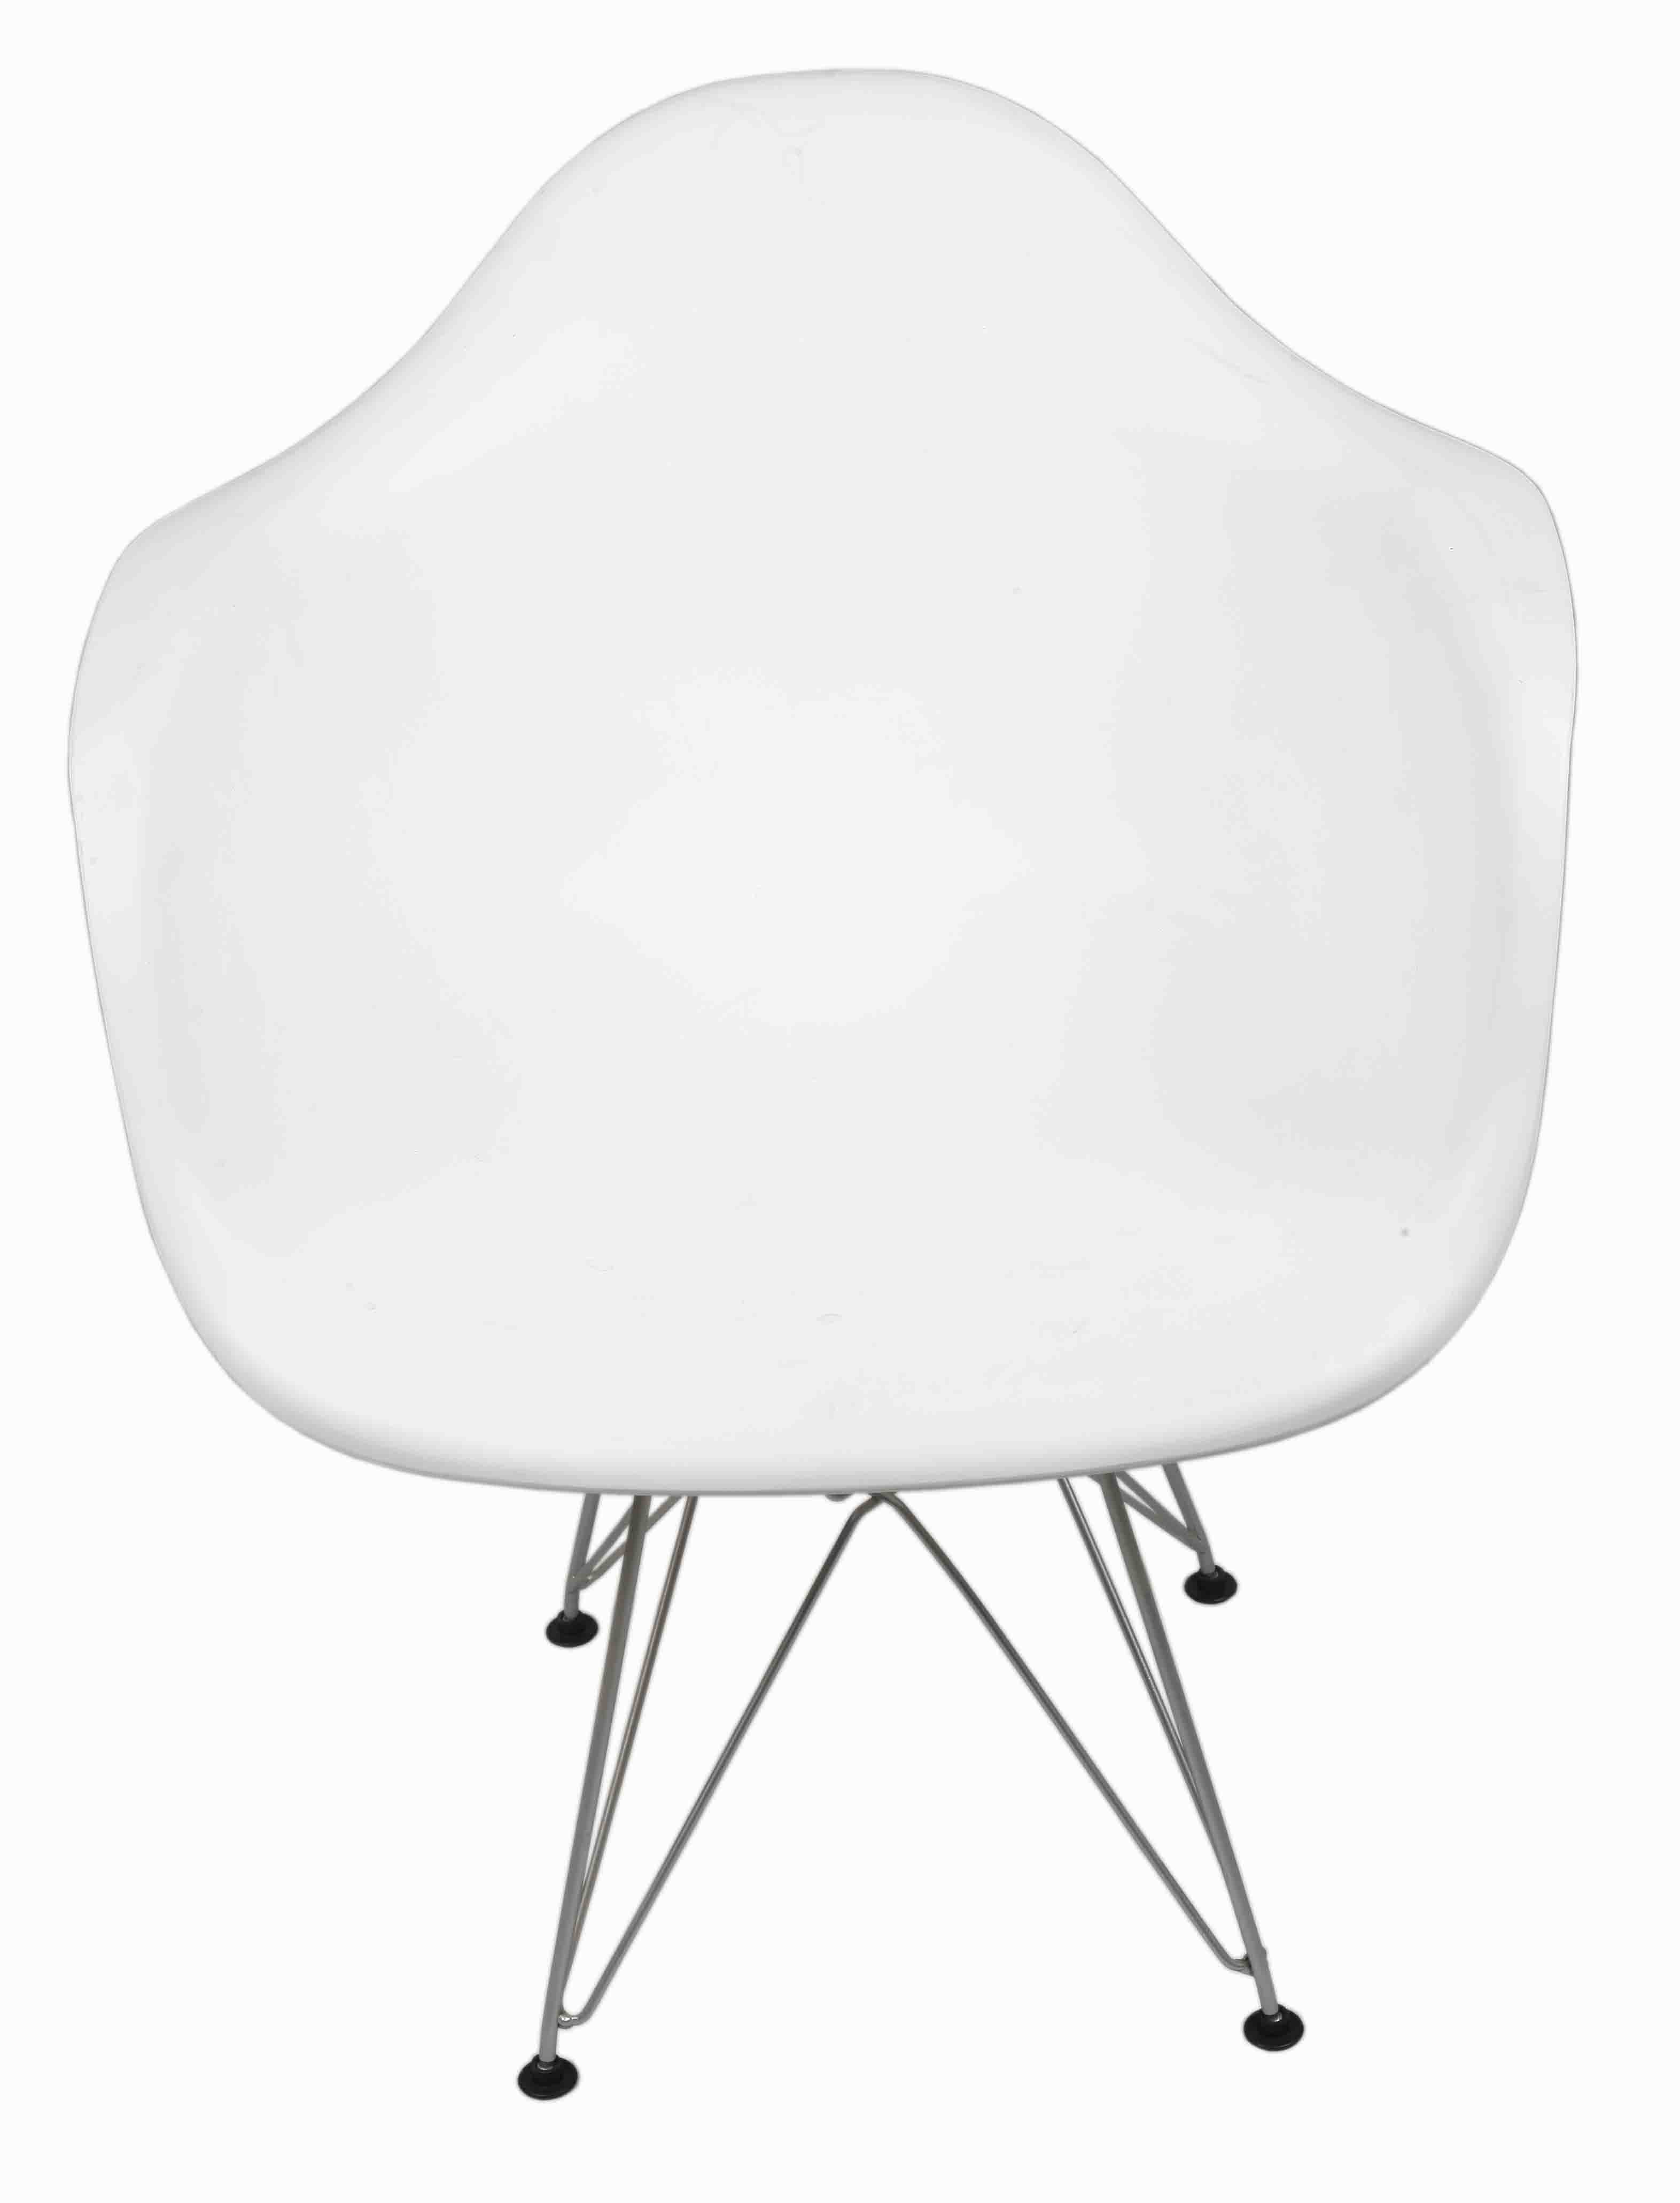 Buy Ventura Vf 196 Ps White Plastic Chair With Ss Legs Online At